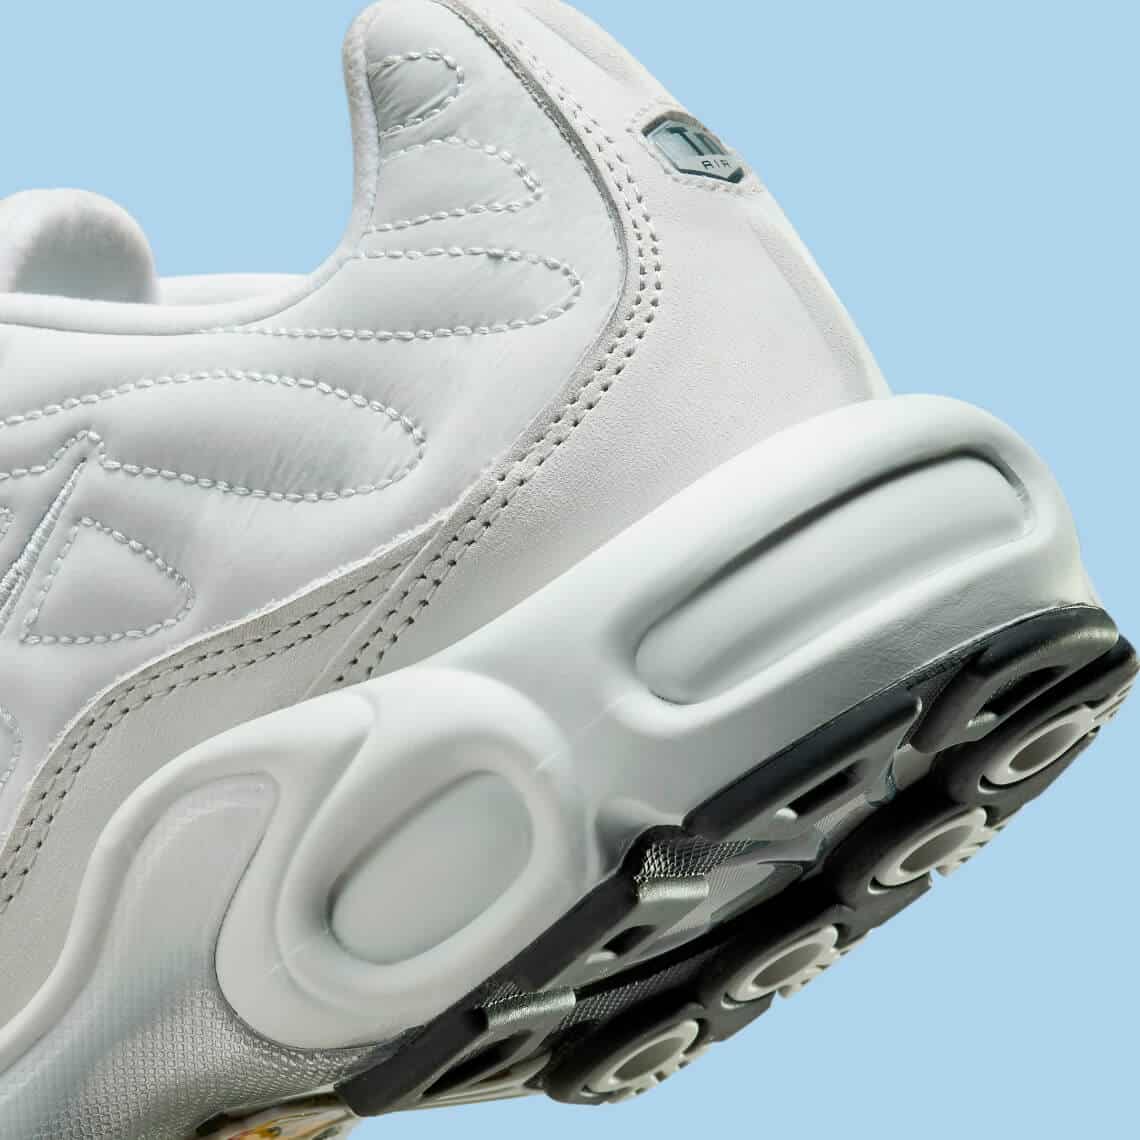 NEW TN Air Max Plus With Fully Reflective Uppers